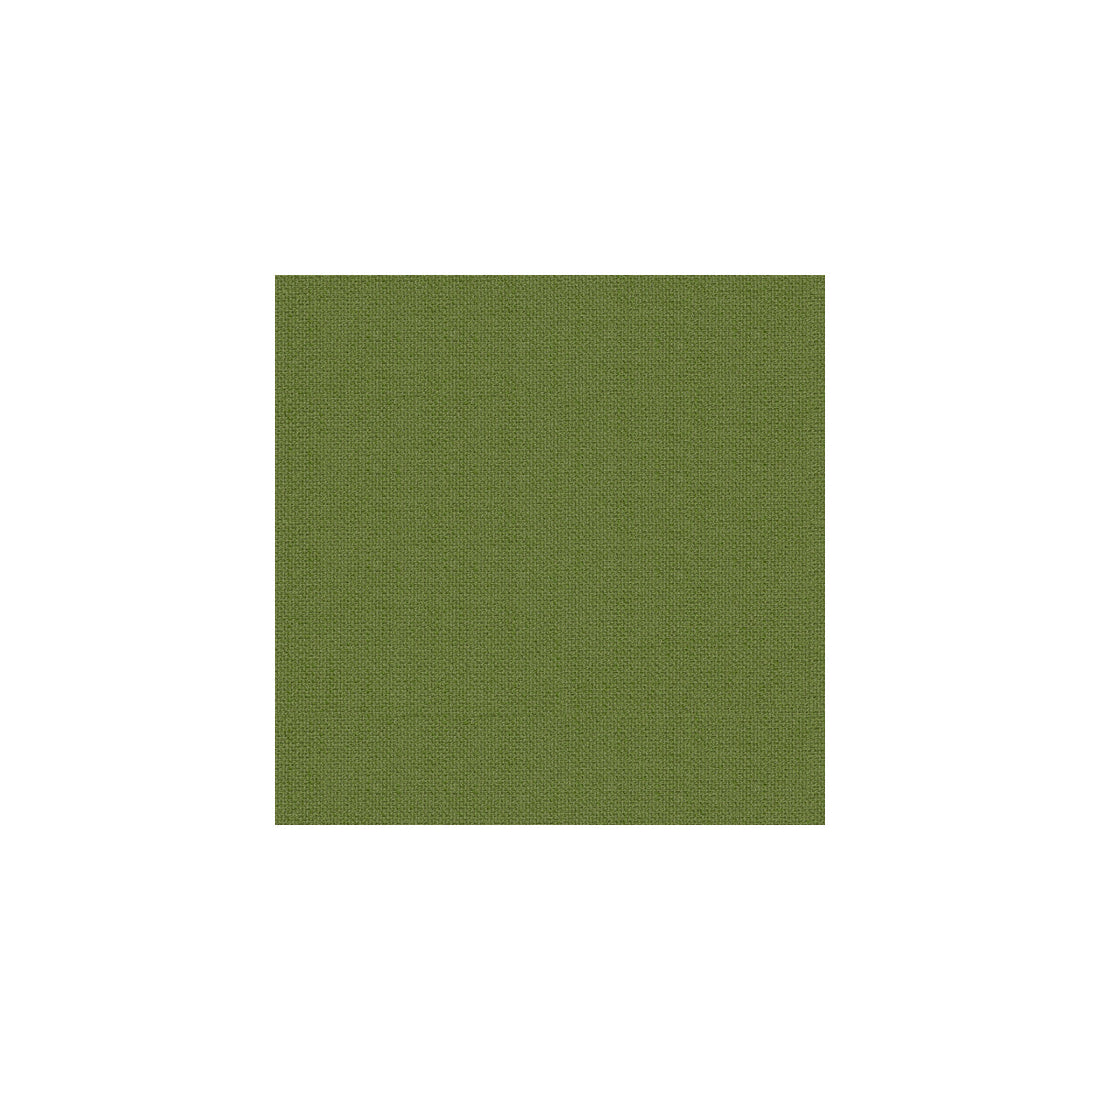 Hudson Solid fabric in leaf color - pattern 32304.3.0 - by Kravet Contract